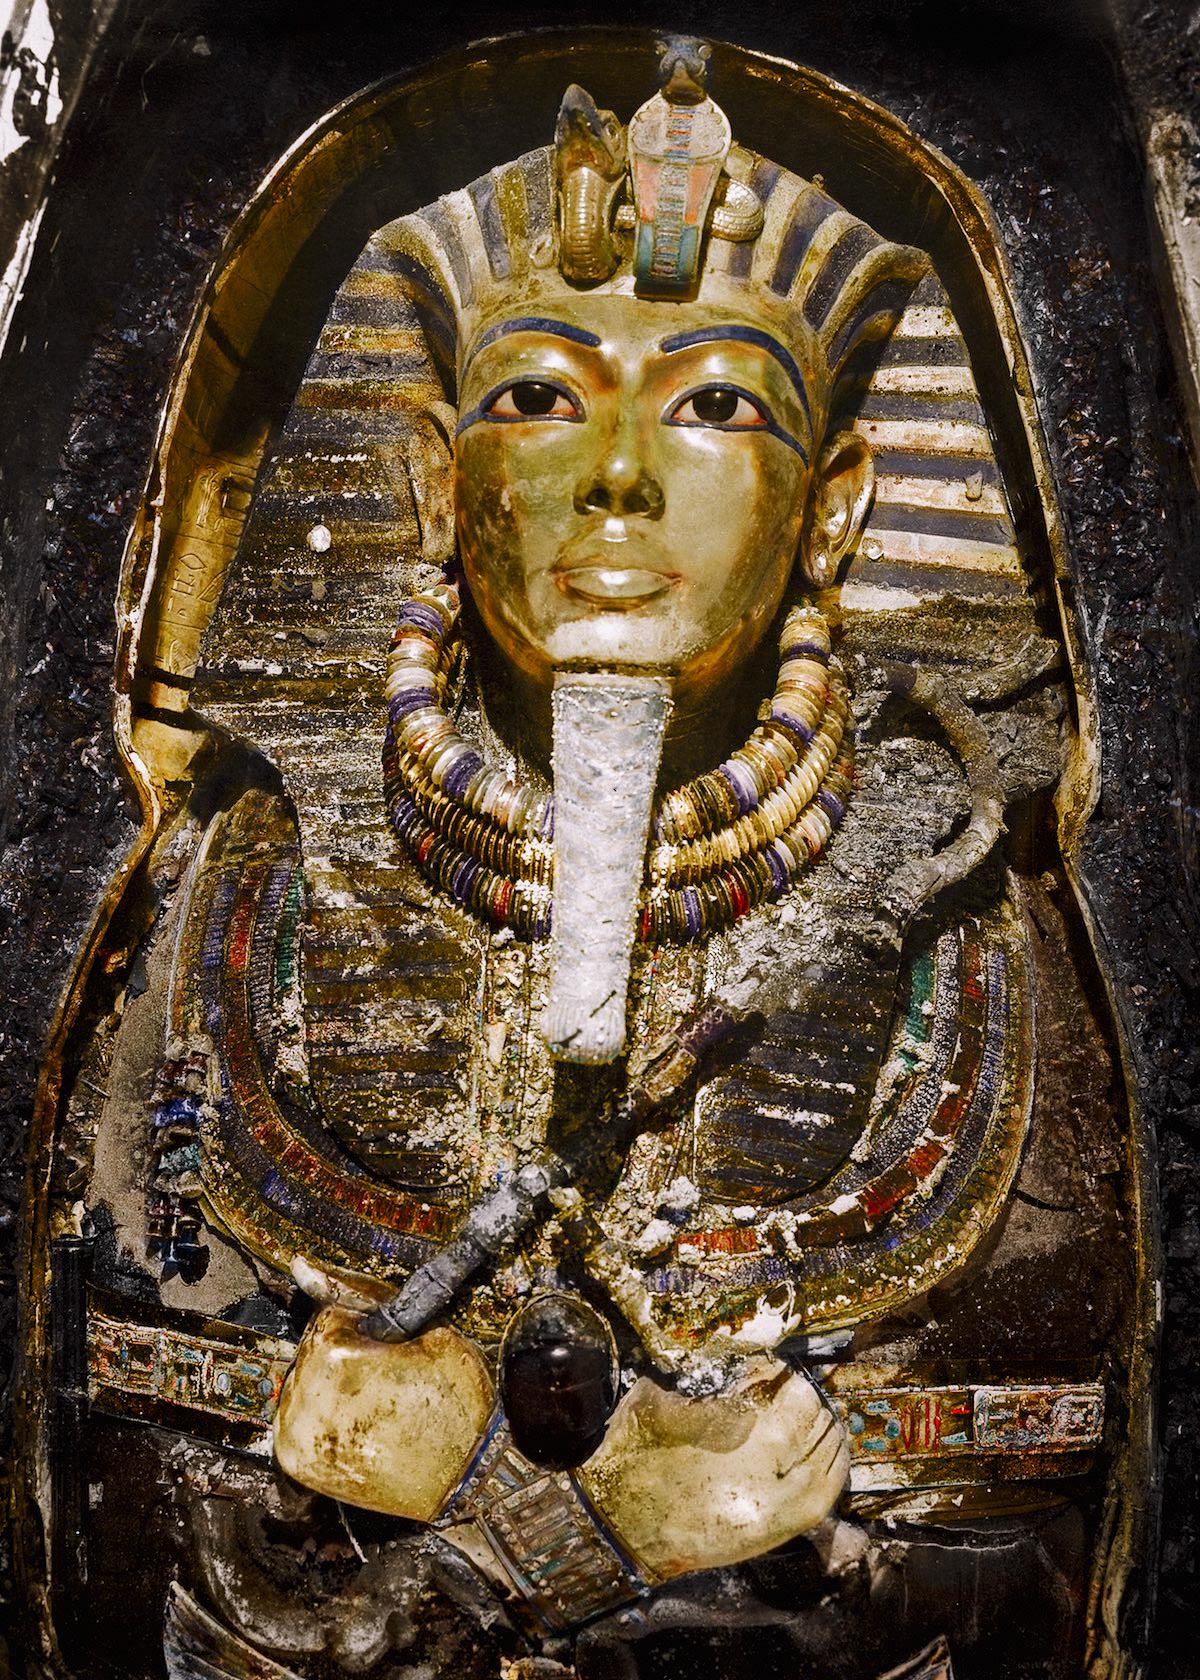 The Opening Of King Tut S Tomb Shown In Stunning Colorized Photos 1923 5 Open Culture